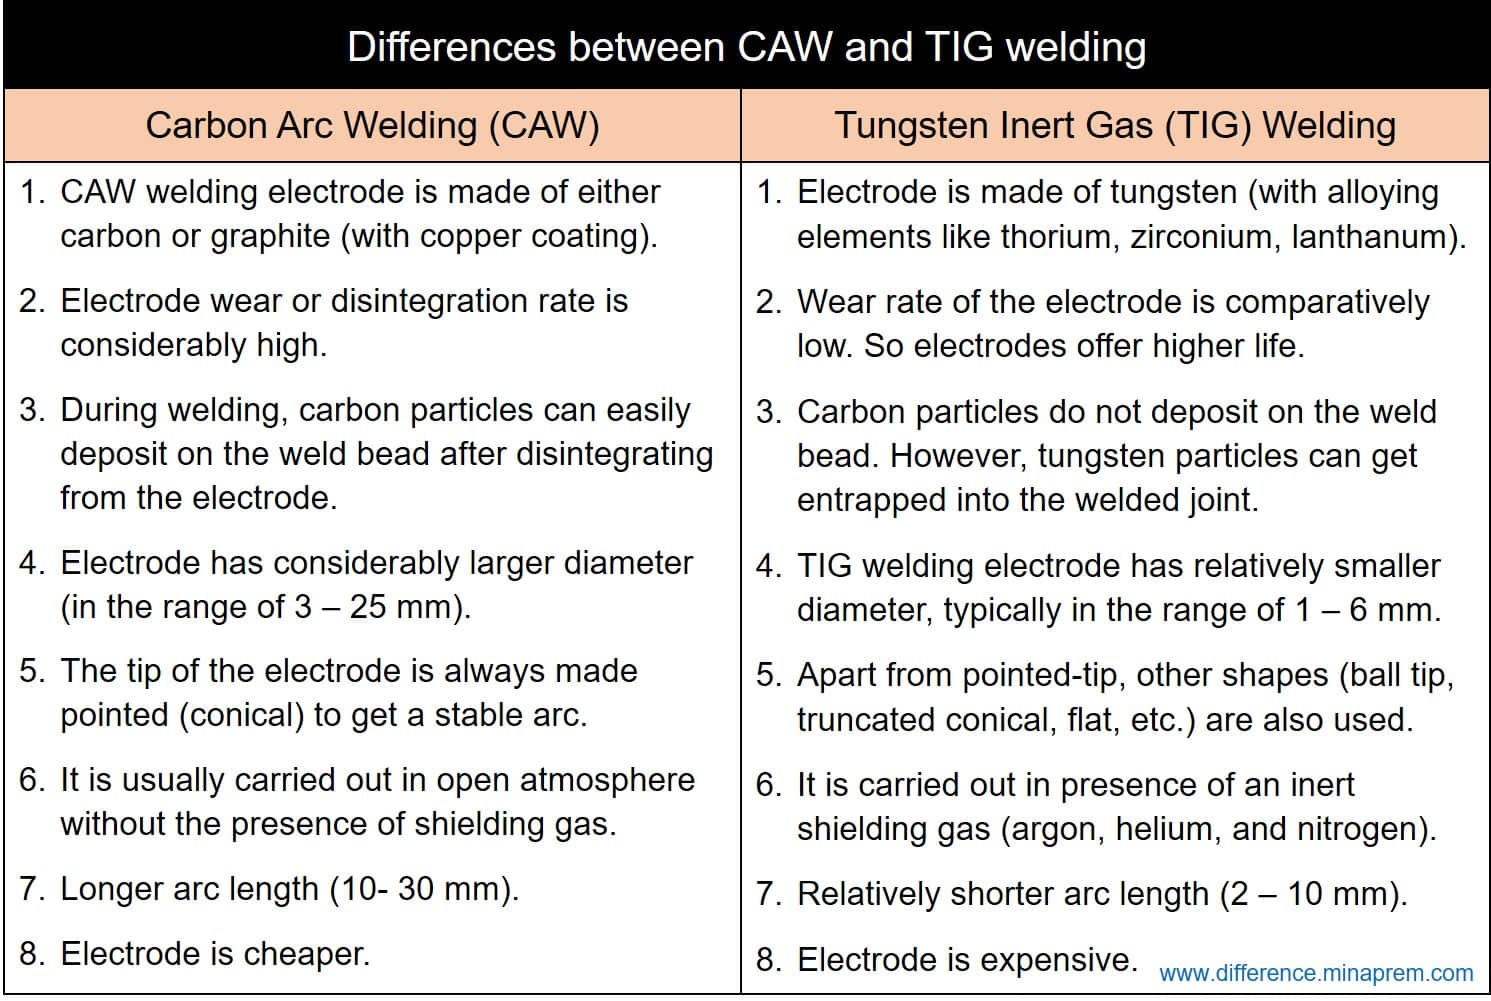 Difference between CAW and TIG welding - Carbon Arc Welding and Tungsten Inert Gas Welding